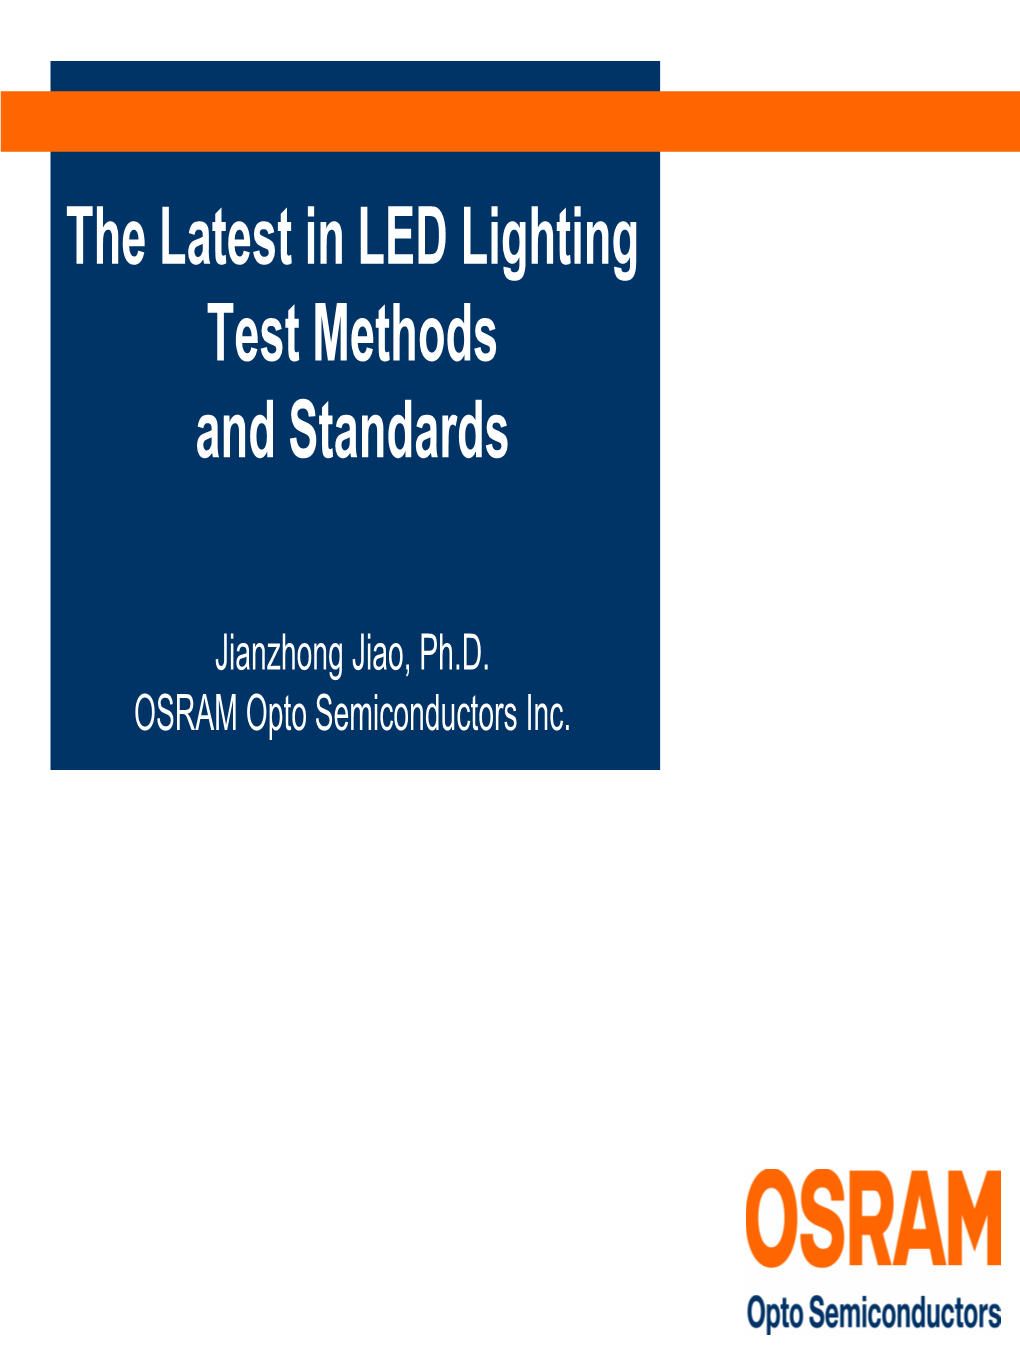 The Latest in LED Lighting Test Method and Standards